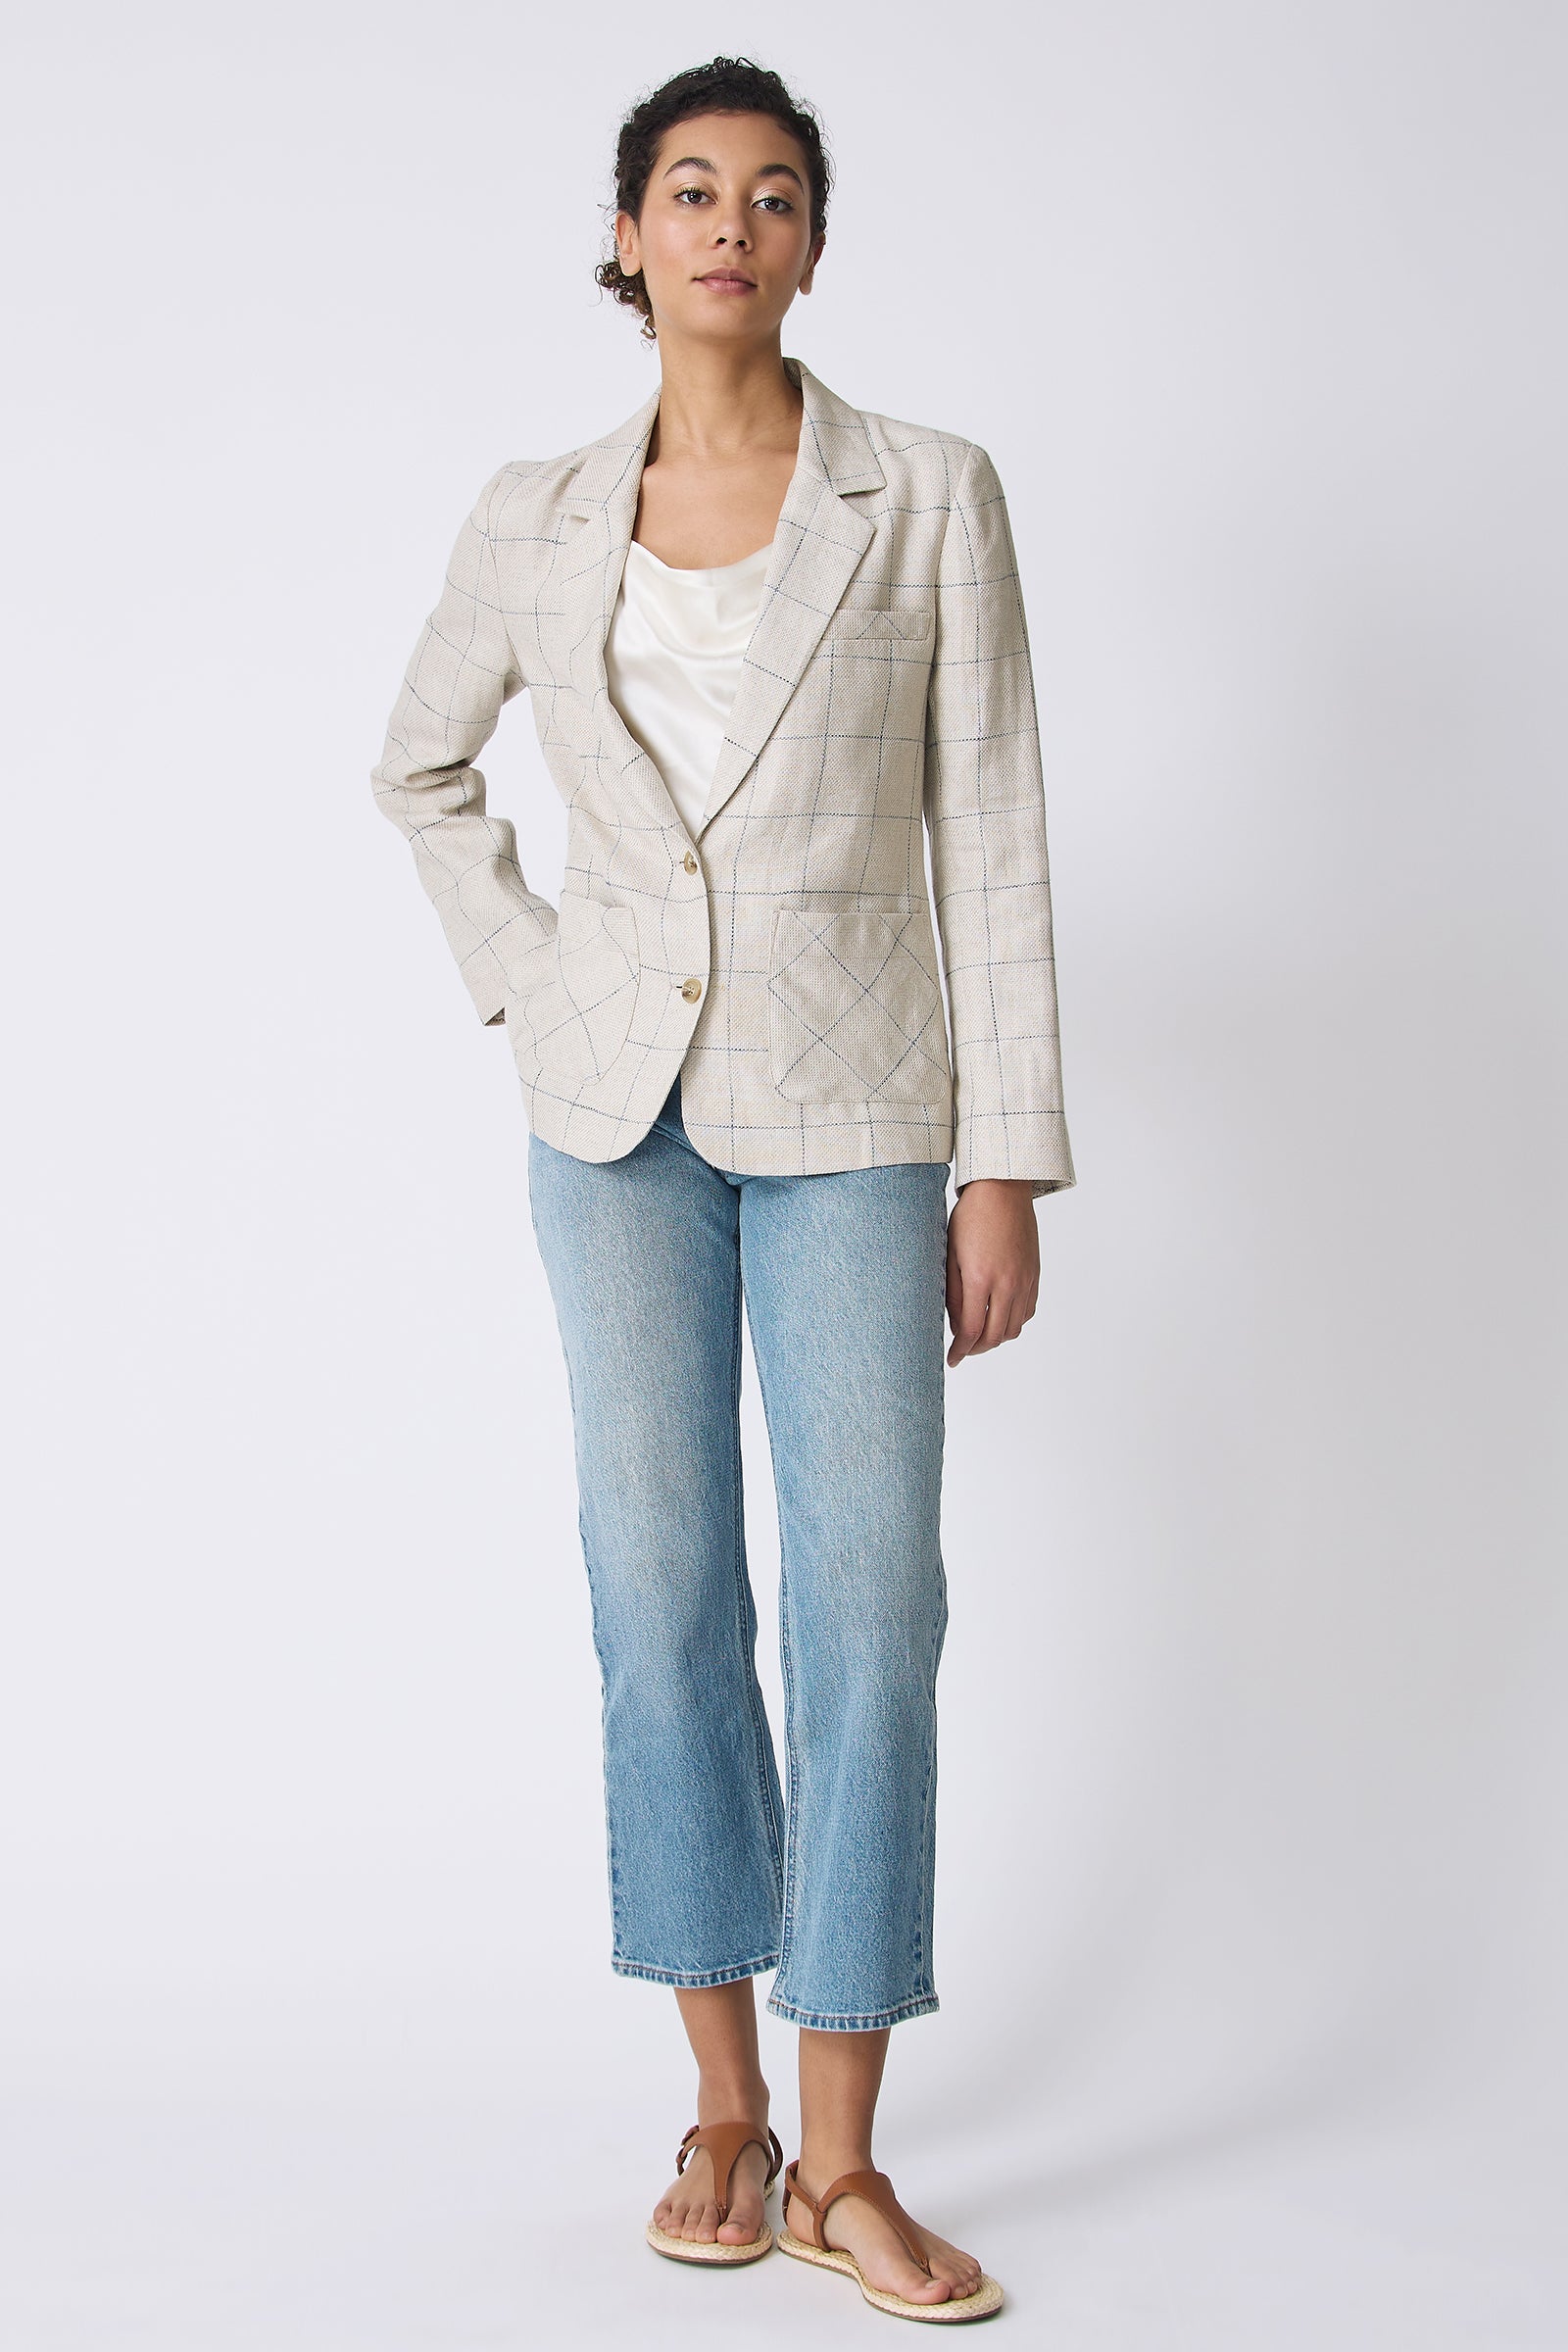 Kal Rieman Castel Patch Pocket Blazer in Windowpane on model with hand behind back full front view